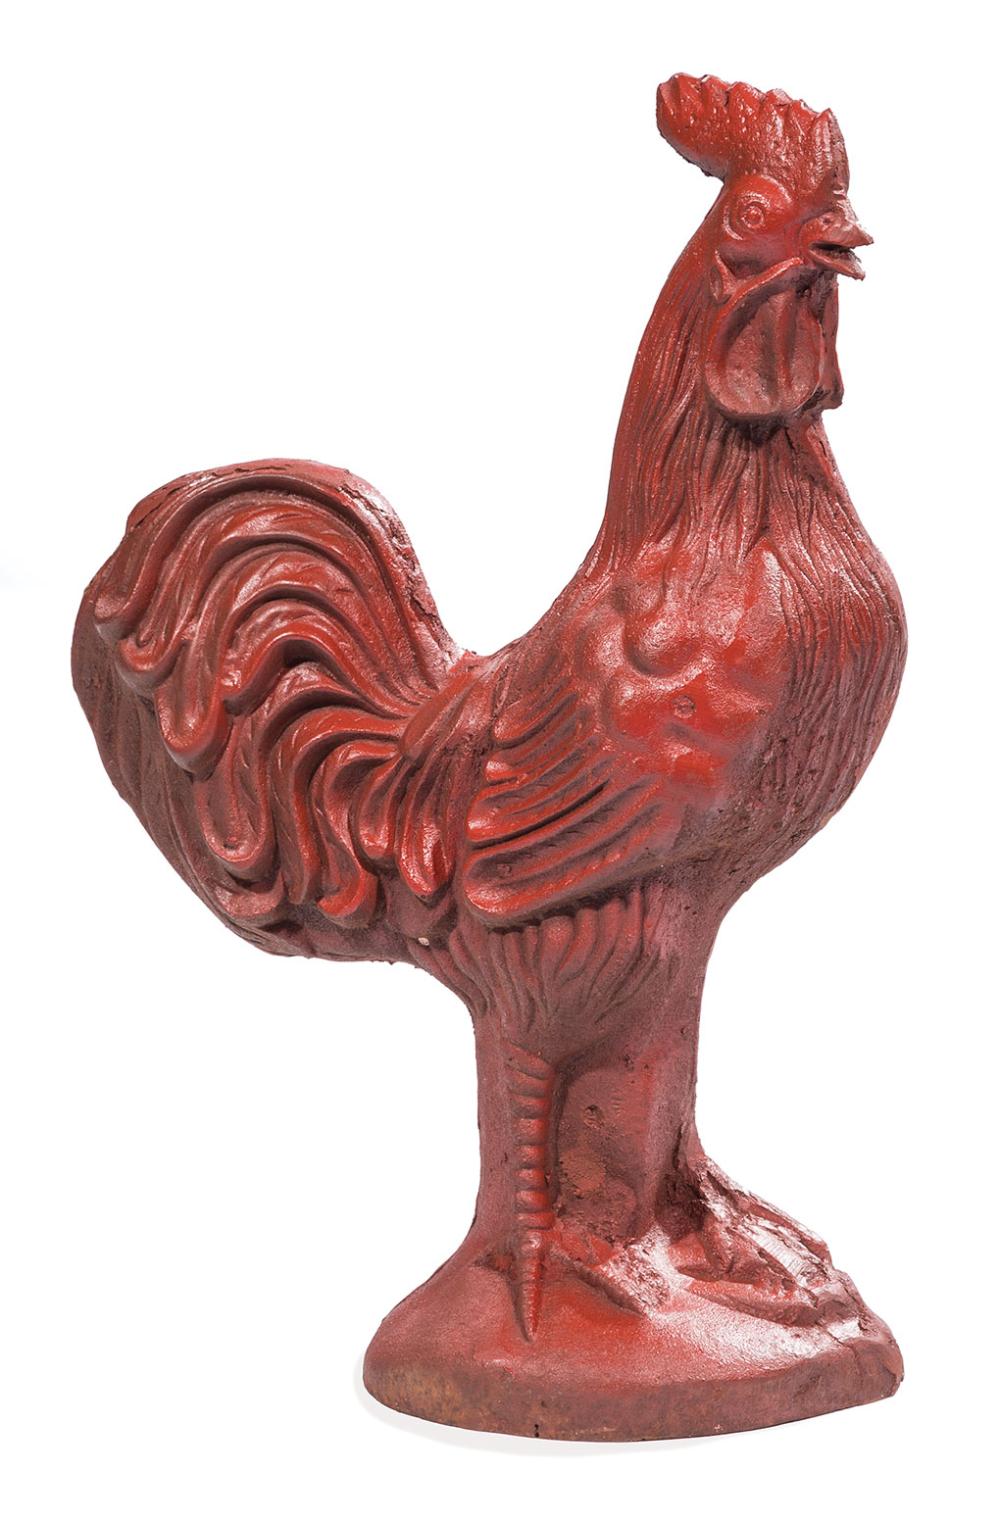 CAST IRON GARDEN FIGURE OF A ROOSTERCast 31cabb